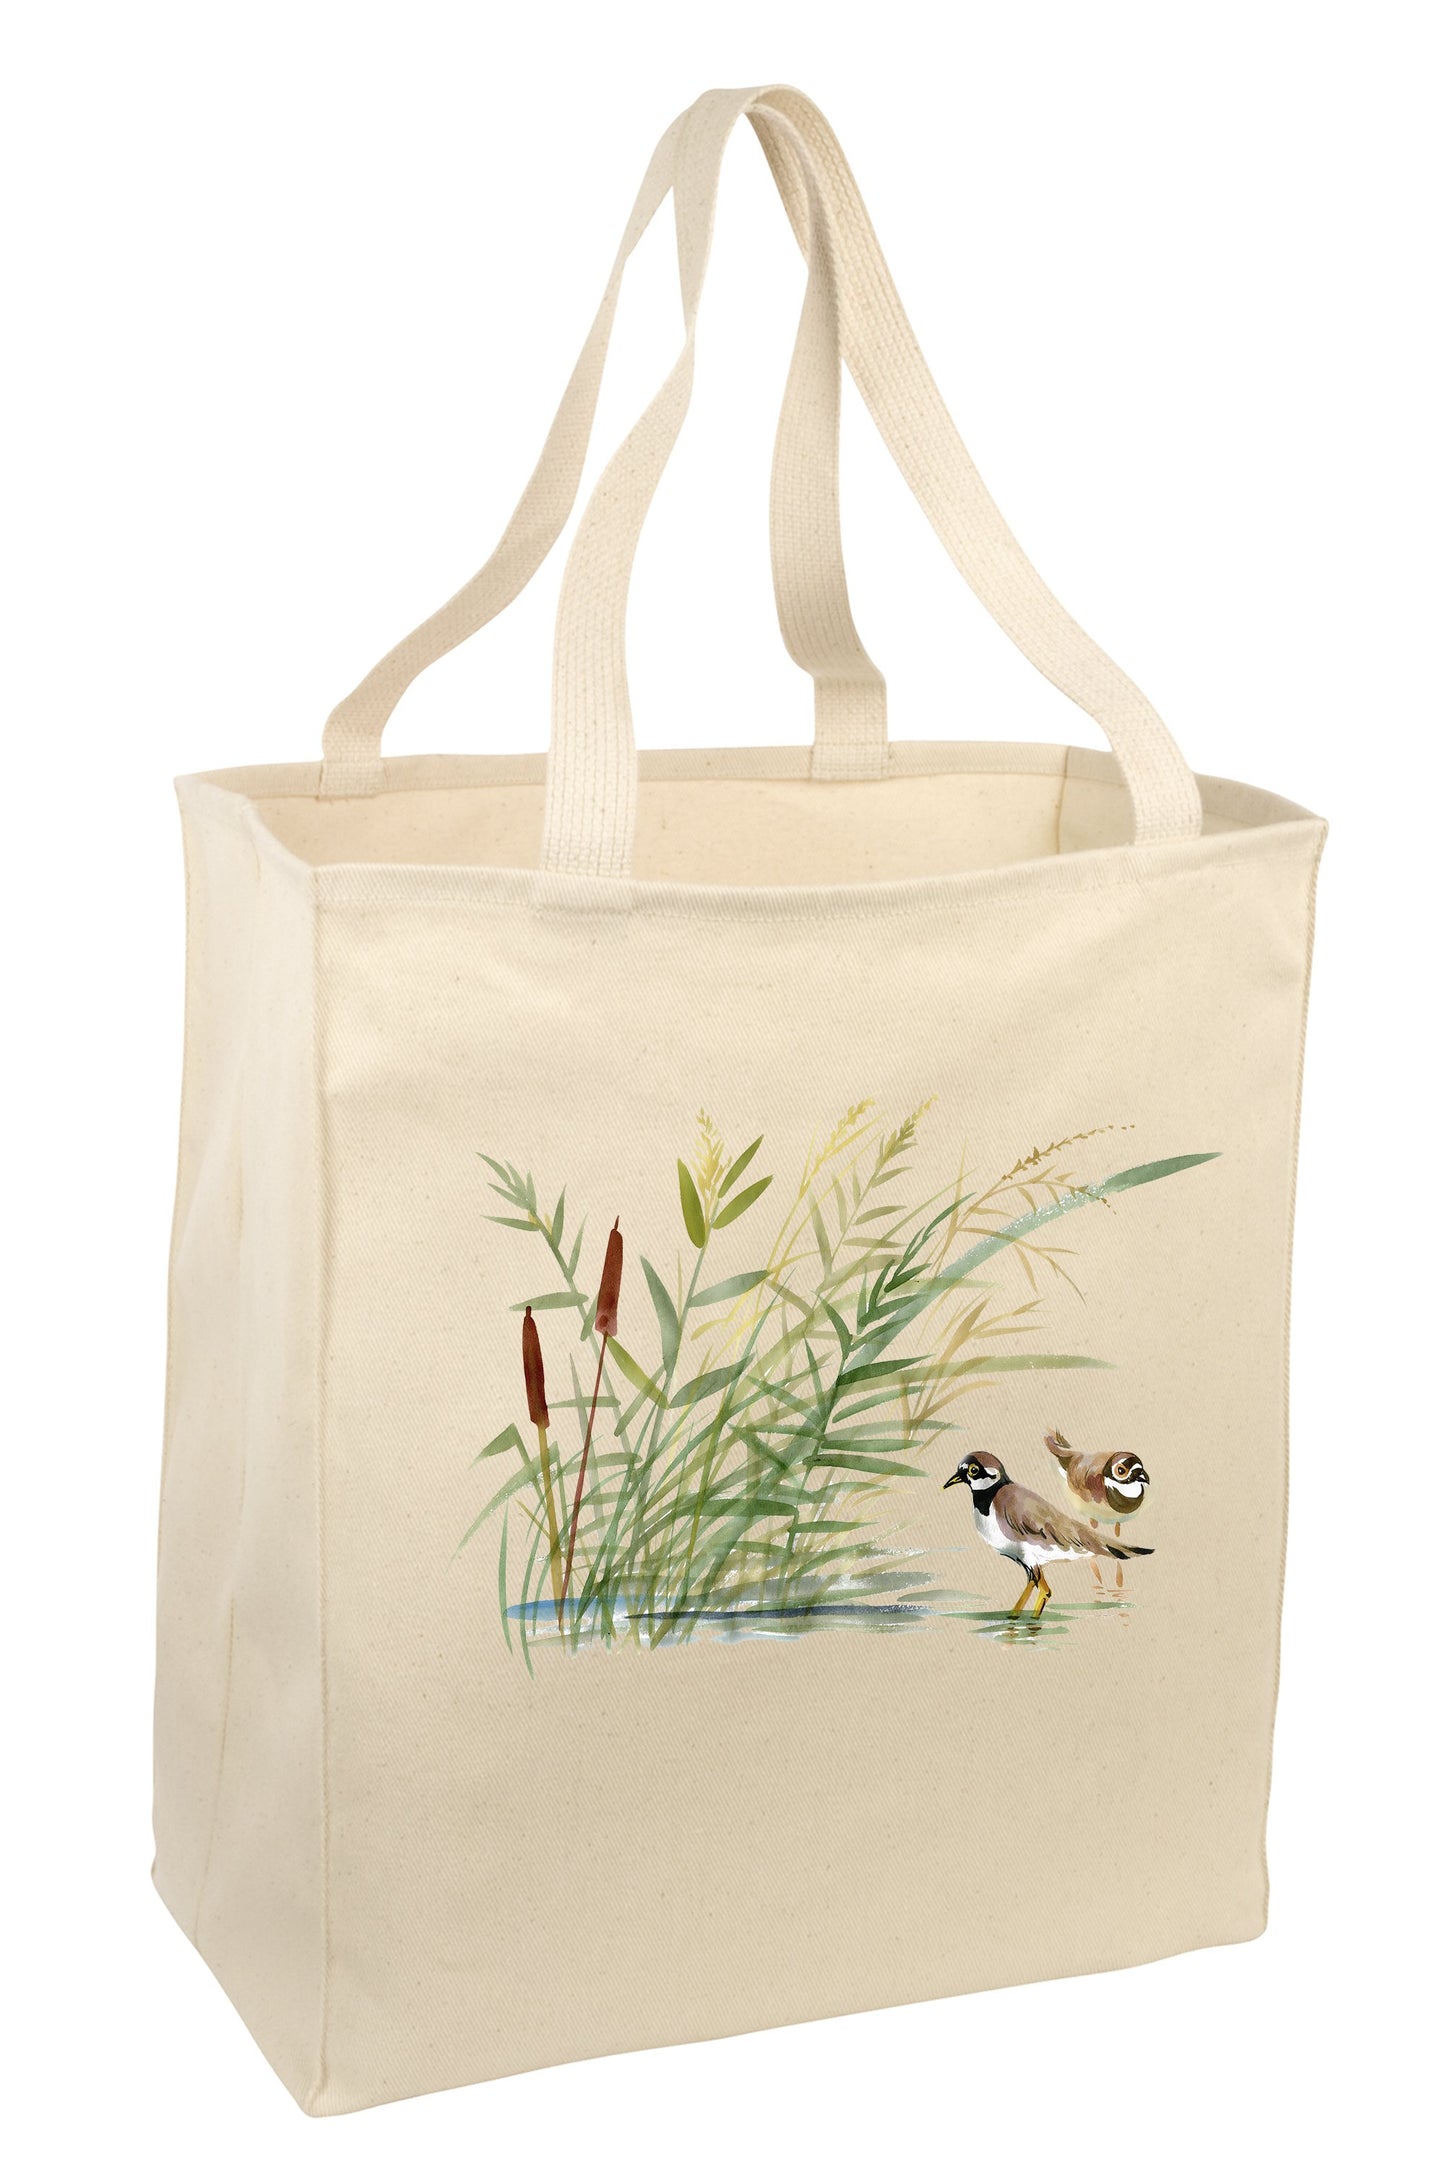 Over the Shoulder Beach Summer Tote Bag. Durable 100% Cotton and 22" Long Handle Shopping Bag. (Bird)